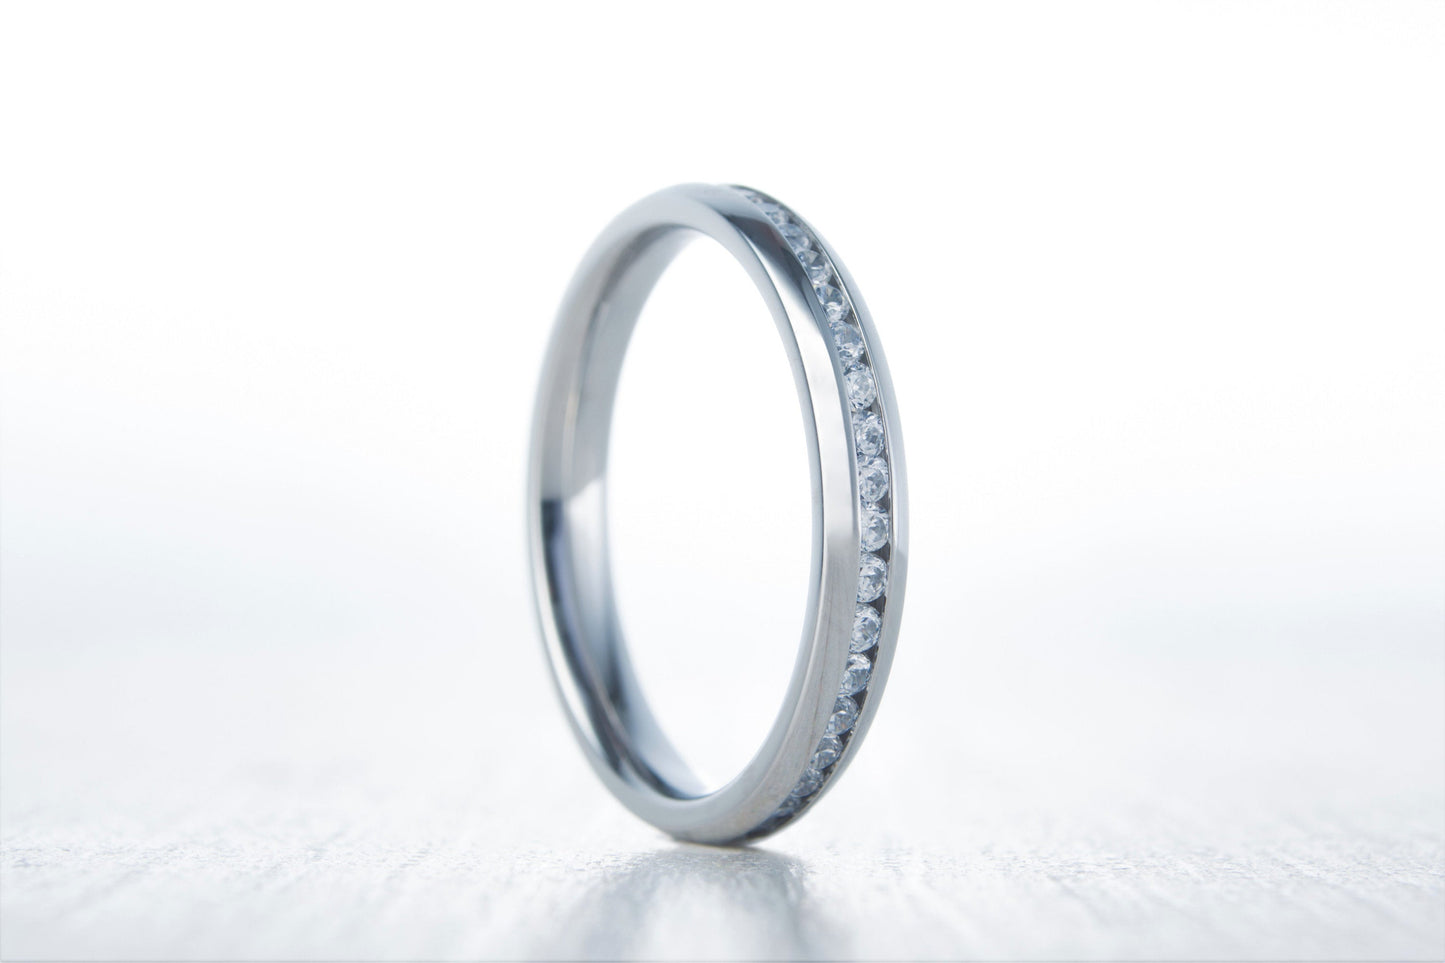 3mm Wide Man Made Diamond Simulant Full Eternity ring / stacking ring in white gold or titanium - Wedding Band - Engagement ring